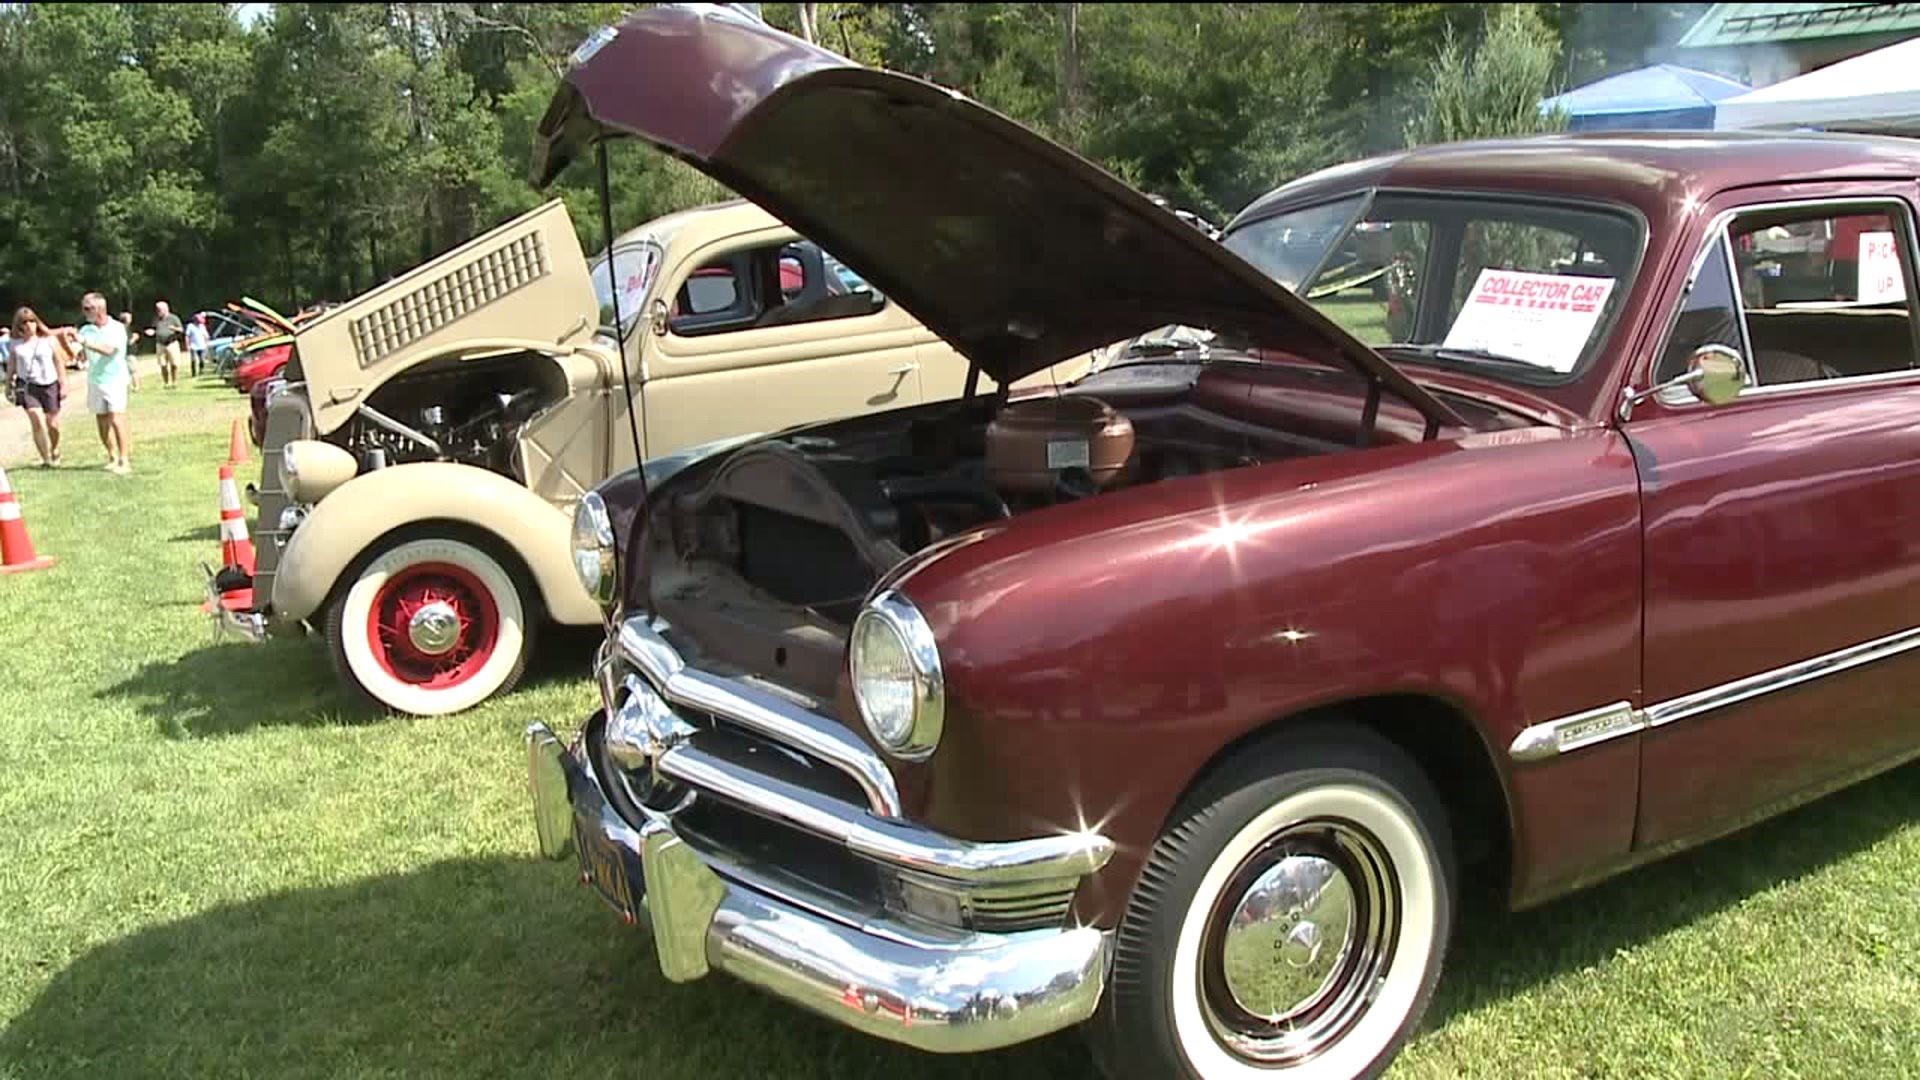 Car Show in Man's Memory Helps Provide Scholarships for College